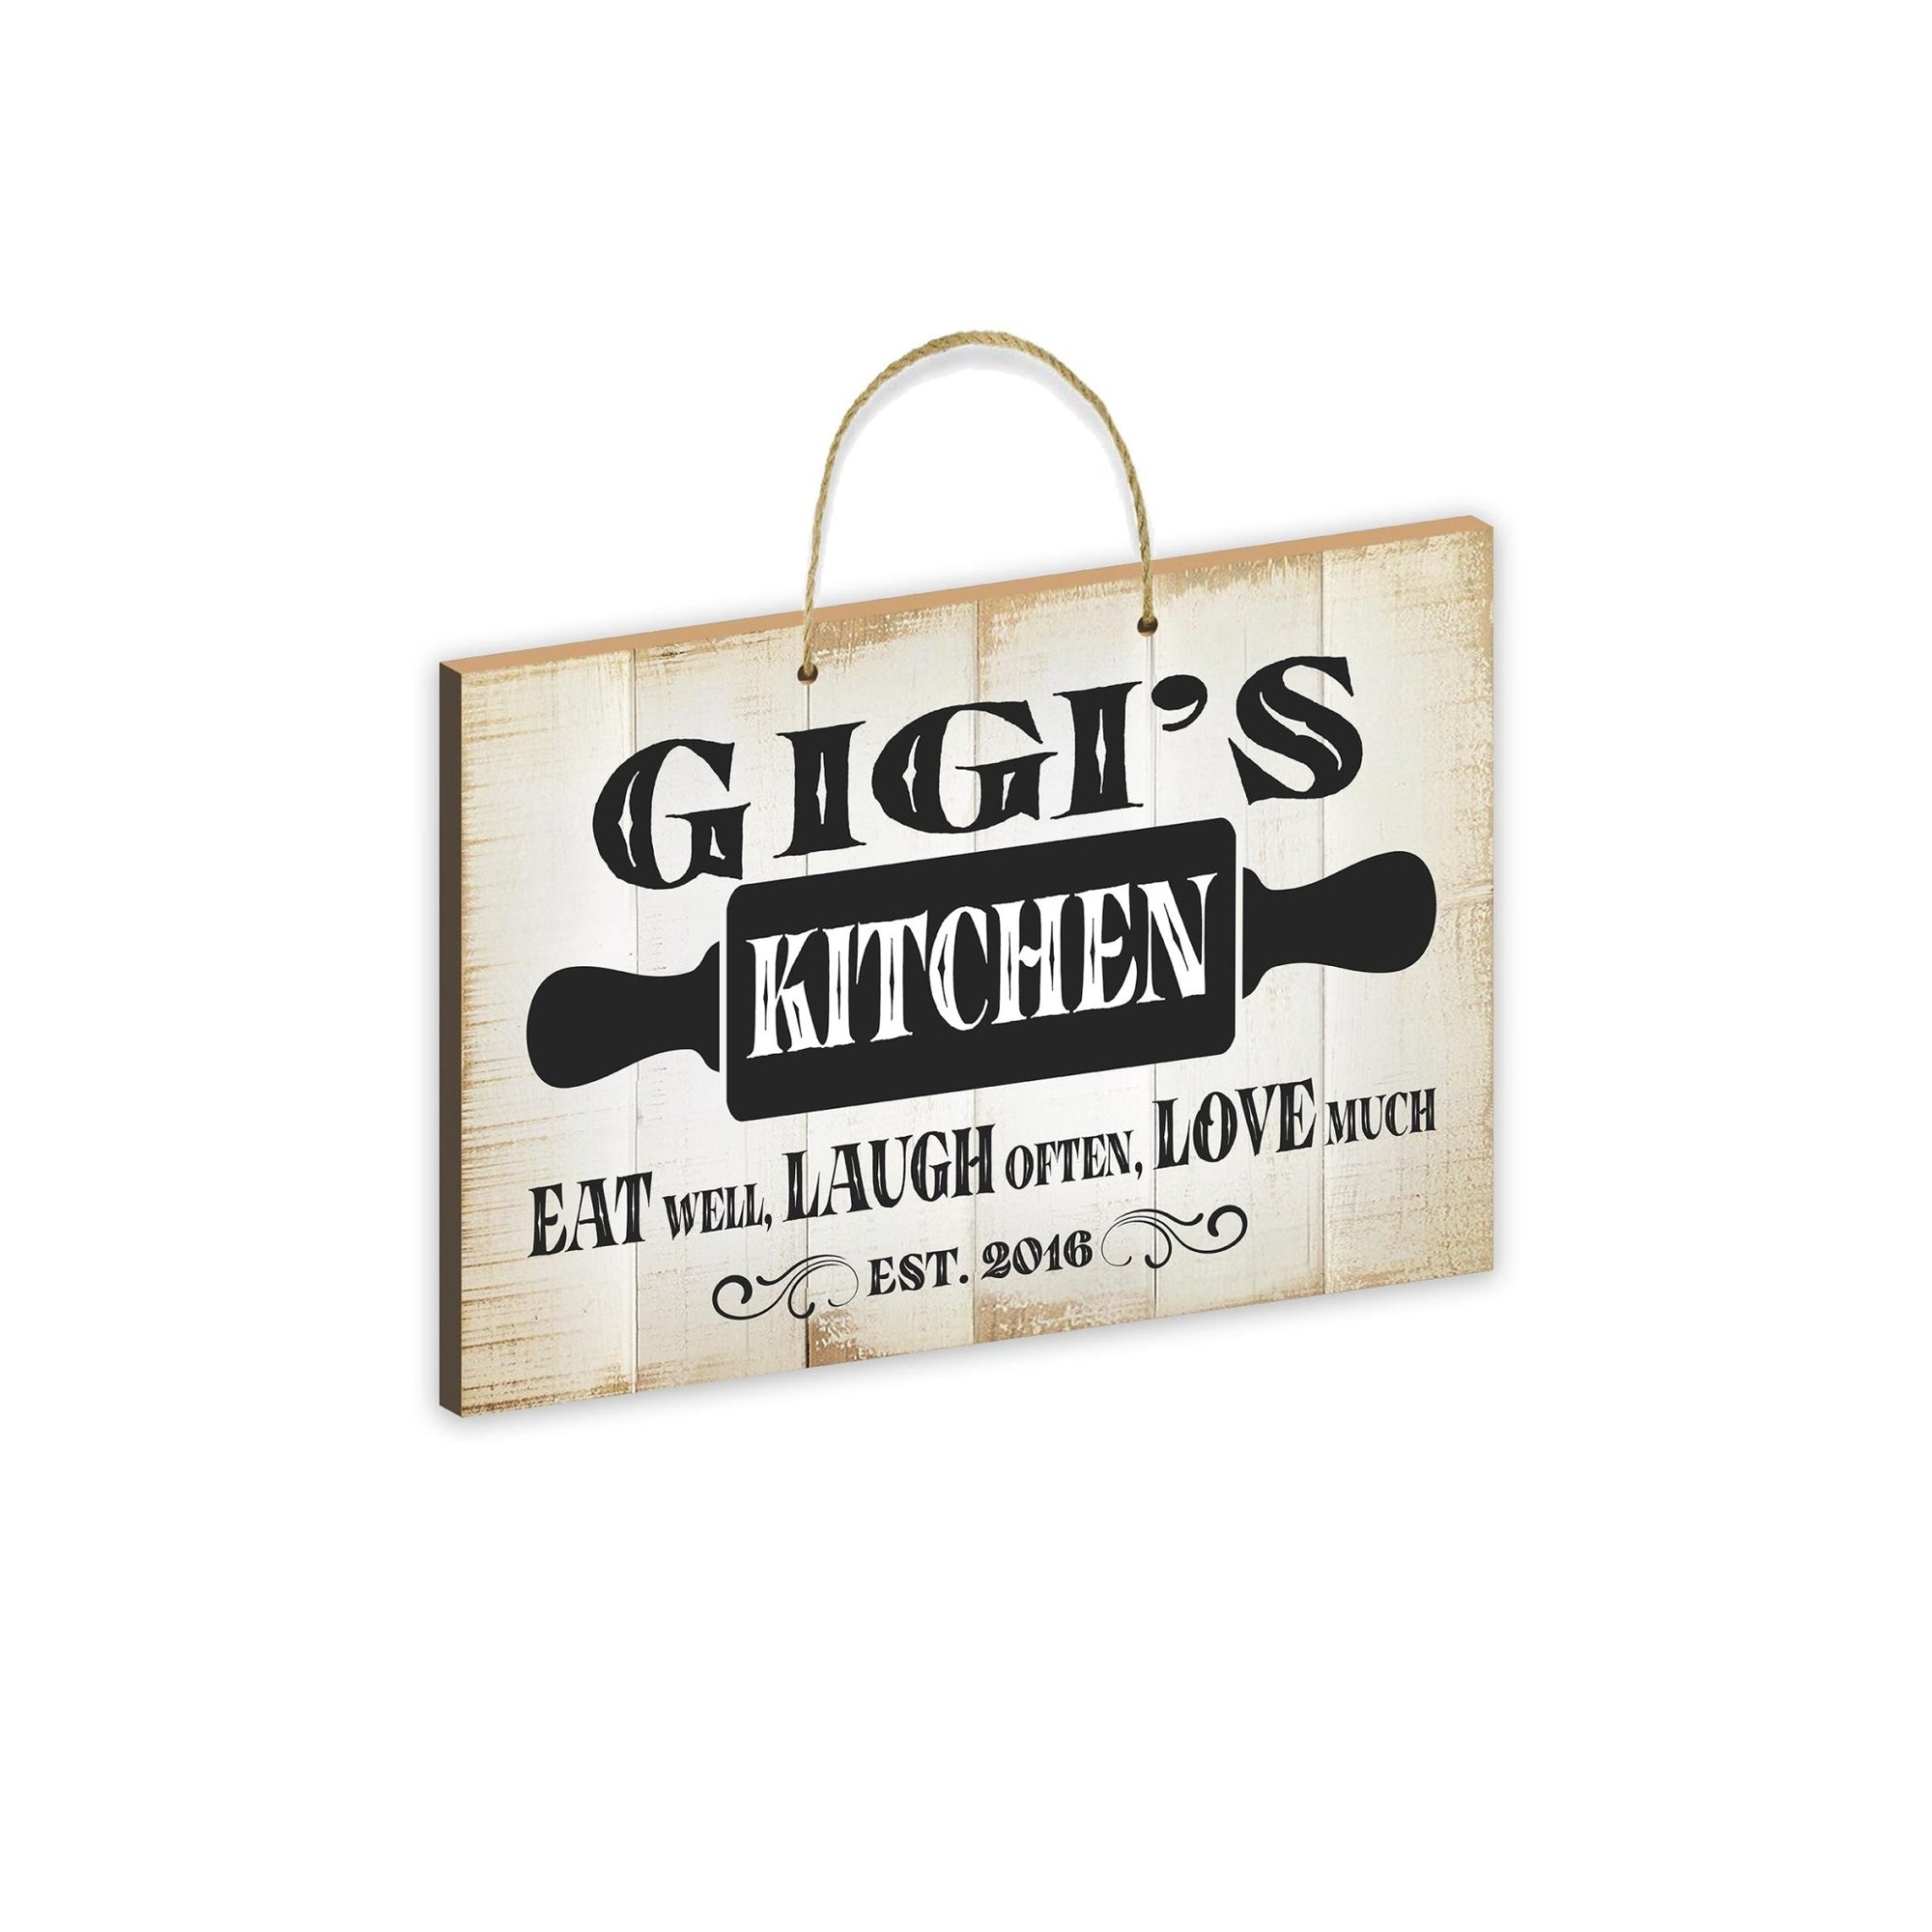 Inspirational Wooden Rustic Wall Hanging Rope Sign Kitchen Home Décor - Eat Well, Laugh Often, Love Much [KITCHEN] - LifeSong Milestones